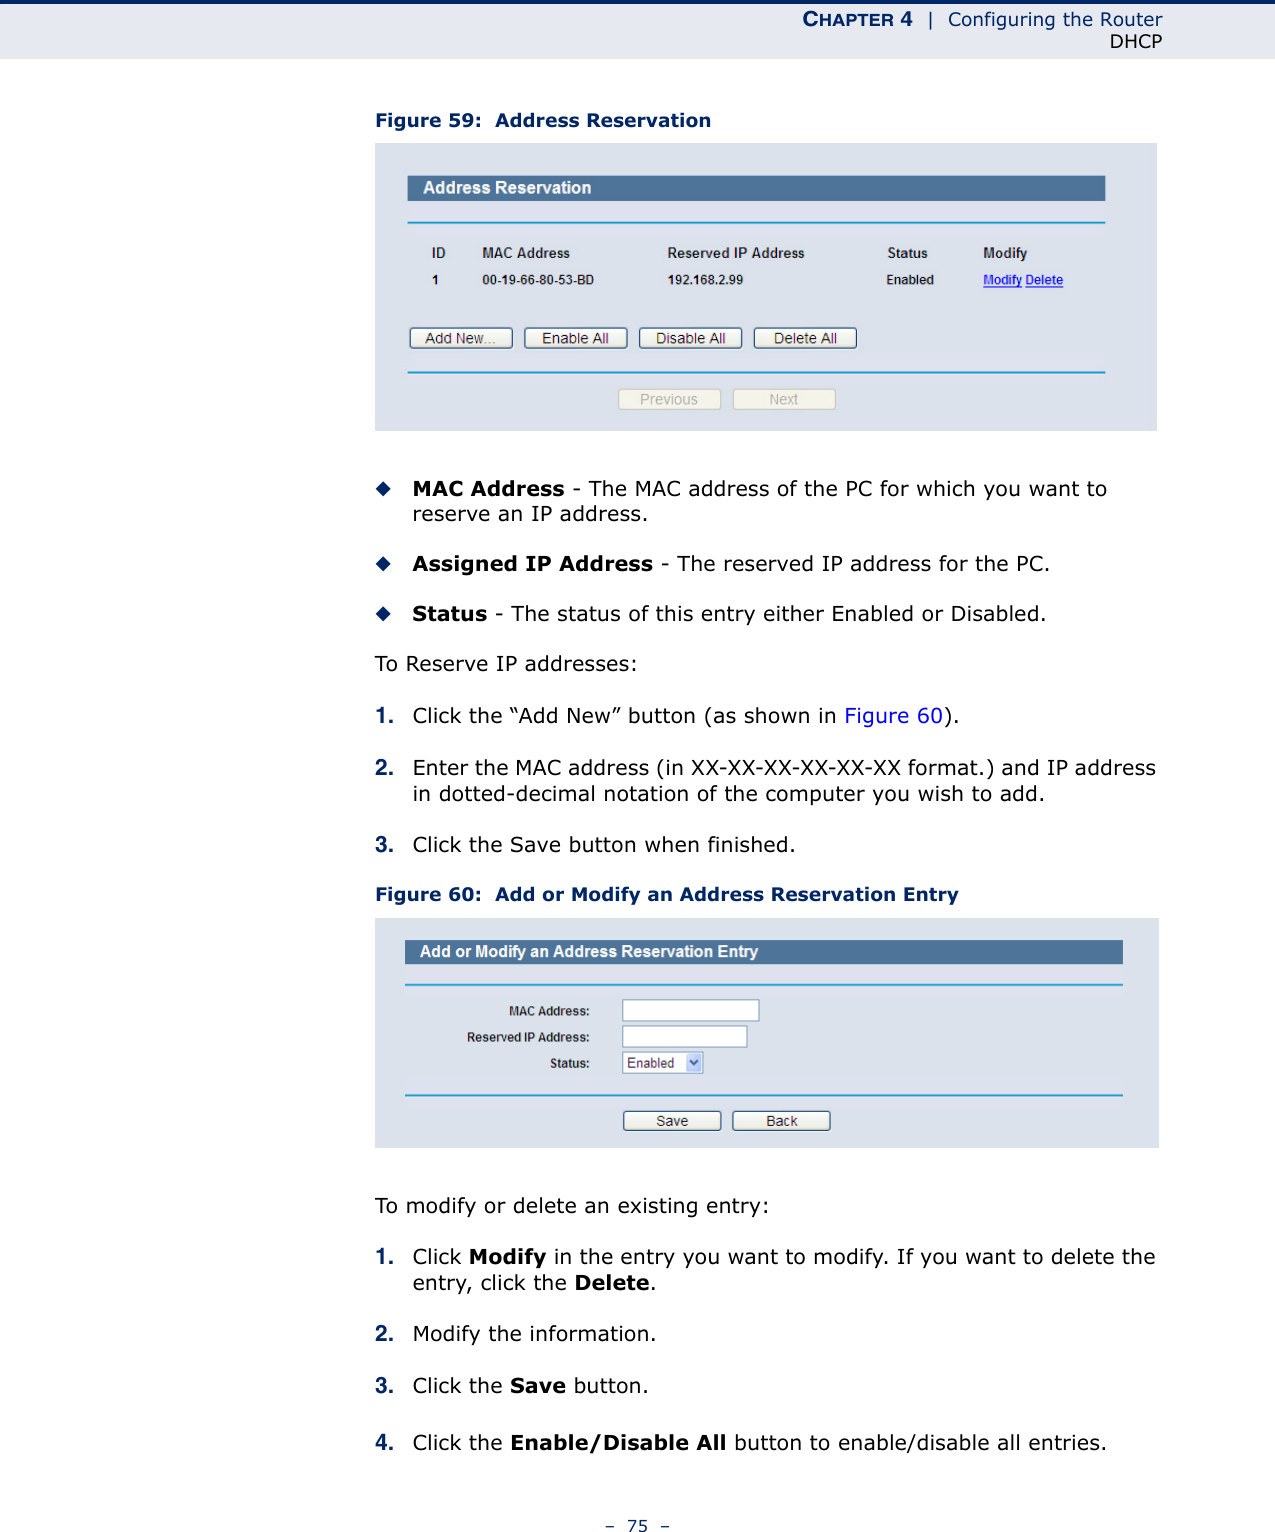 CHAPTER 4  |  Configuring the RouterDHCP–  75  –Figure 59:  Address Reservation◆MAC Address - The MAC address of the PC for which you want to reserve an IP address.◆Assigned IP Address - The reserved IP address for the PC.◆Status - The status of this entry either Enabled or Disabled.To Reserve IP addresses: 1. Click the “Add New” button (as shown in Figure 60).2. Enter the MAC address (in XX-XX-XX-XX-XX-XX format.) and IP address in dotted-decimal notation of the computer you wish to add. 3. Click the Save button when finished. Figure 60:  Add or Modify an Address Reservation EntryTo modify or delete an existing entry:1. Click Modify in the entry you want to modify. If you want to delete the entry, click the Delete.2. Modify the information. 3. Click the Save button.4. Click the Enable/Disable All button to enable/disable all entries.